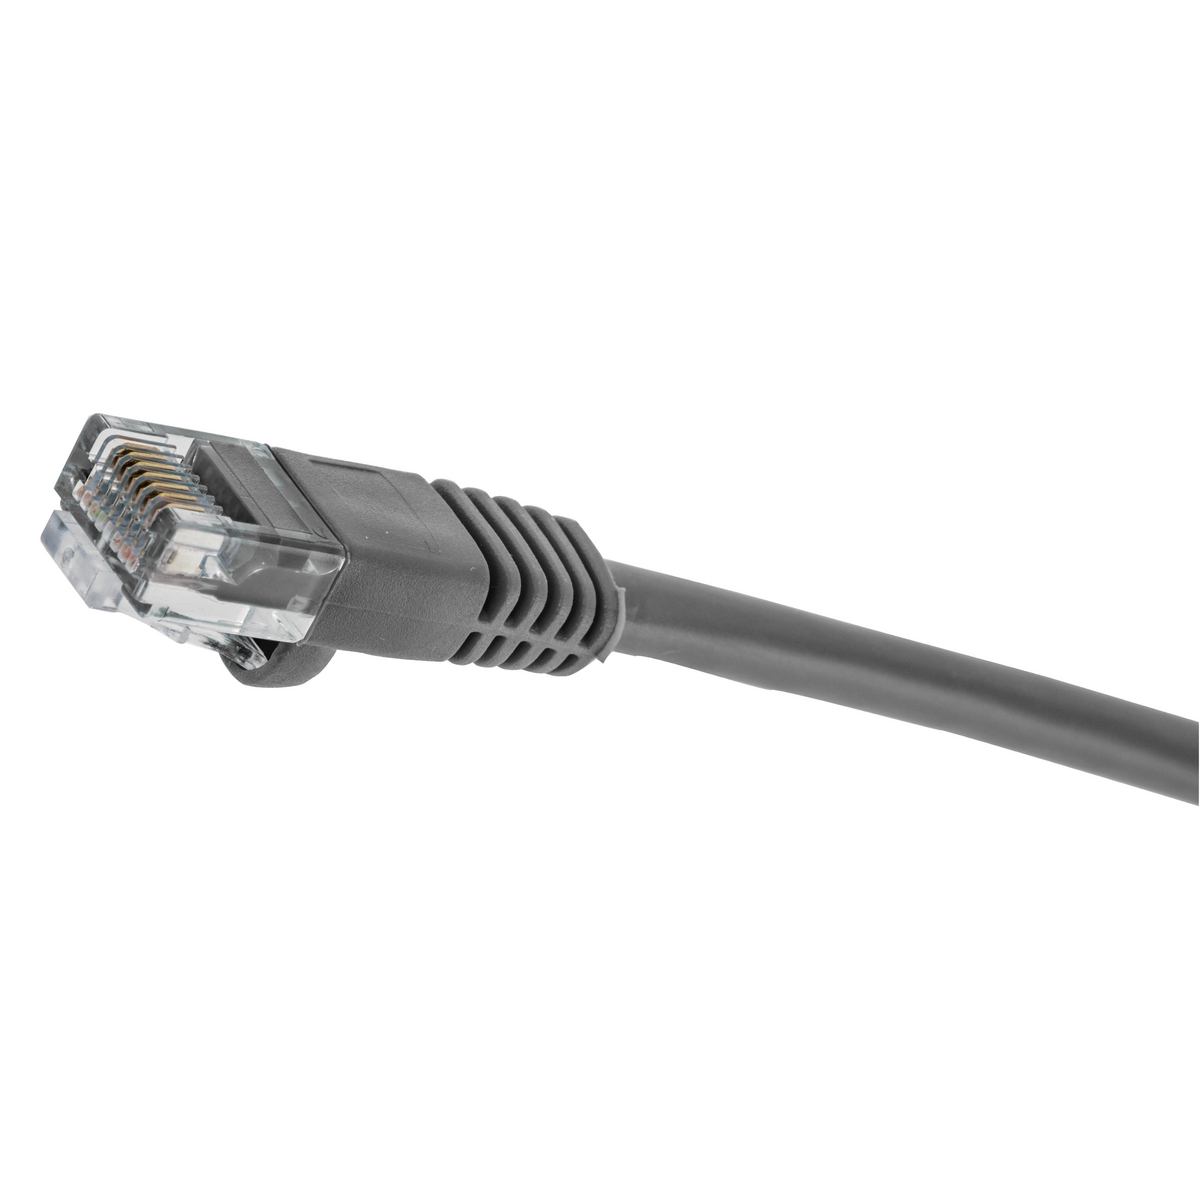 Hubbell Premise Wiring Products, Copper Solutions, Patch Cord,NETSELECT, Cat5E, Slim Style, Gray, 7' Length